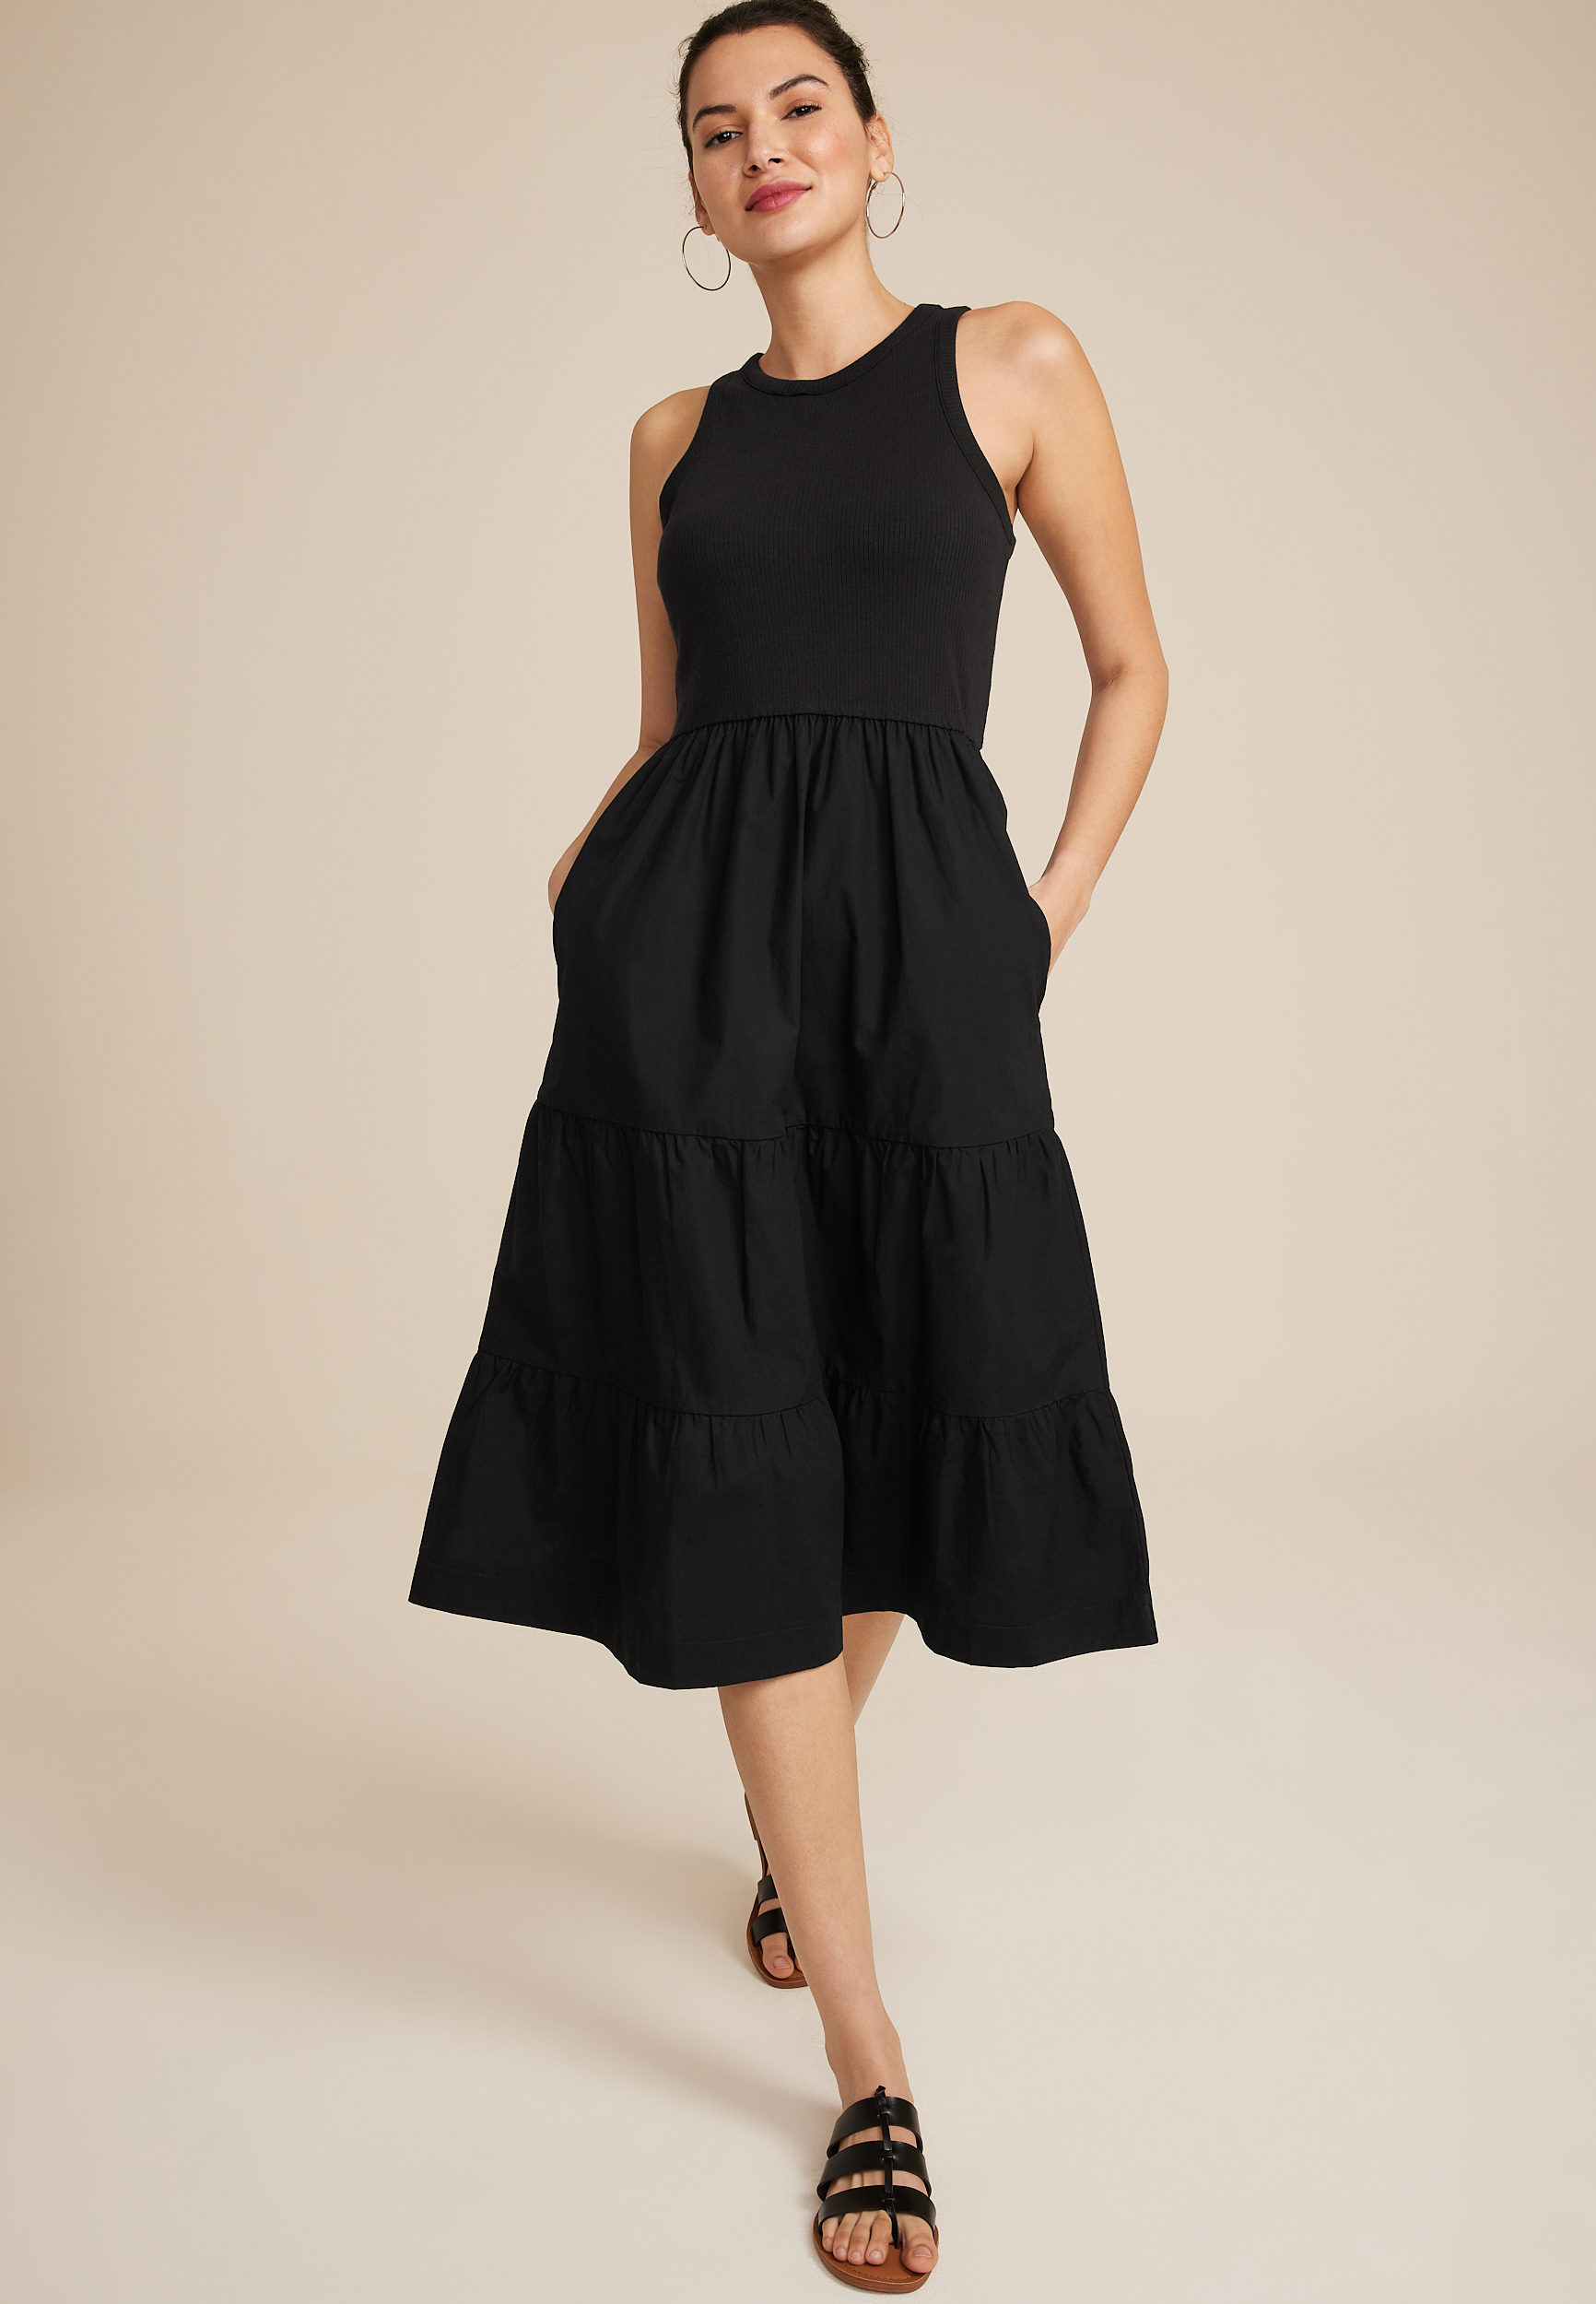 HOT* maurices Clearance: $5 Tops AND $10 Dresses, Boots & More